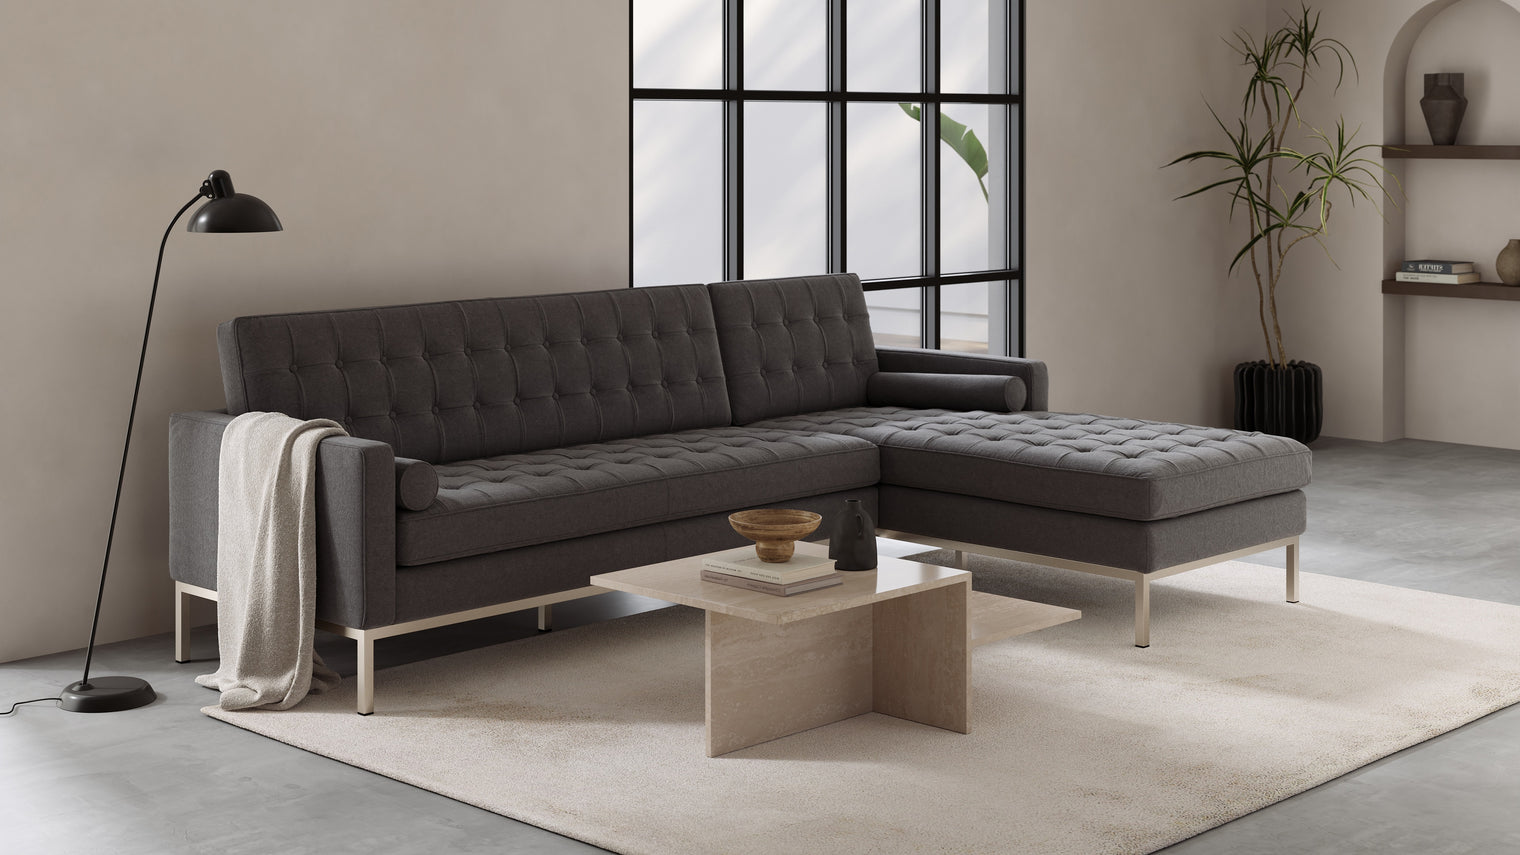 TIMELESS MODERNISM | The Florence Sofa embodies the essence of mid-20th-century modernism. Its clean lines, balanced proportions, and meticulous attention to detail make it an enduring symbol of design sophistication.
